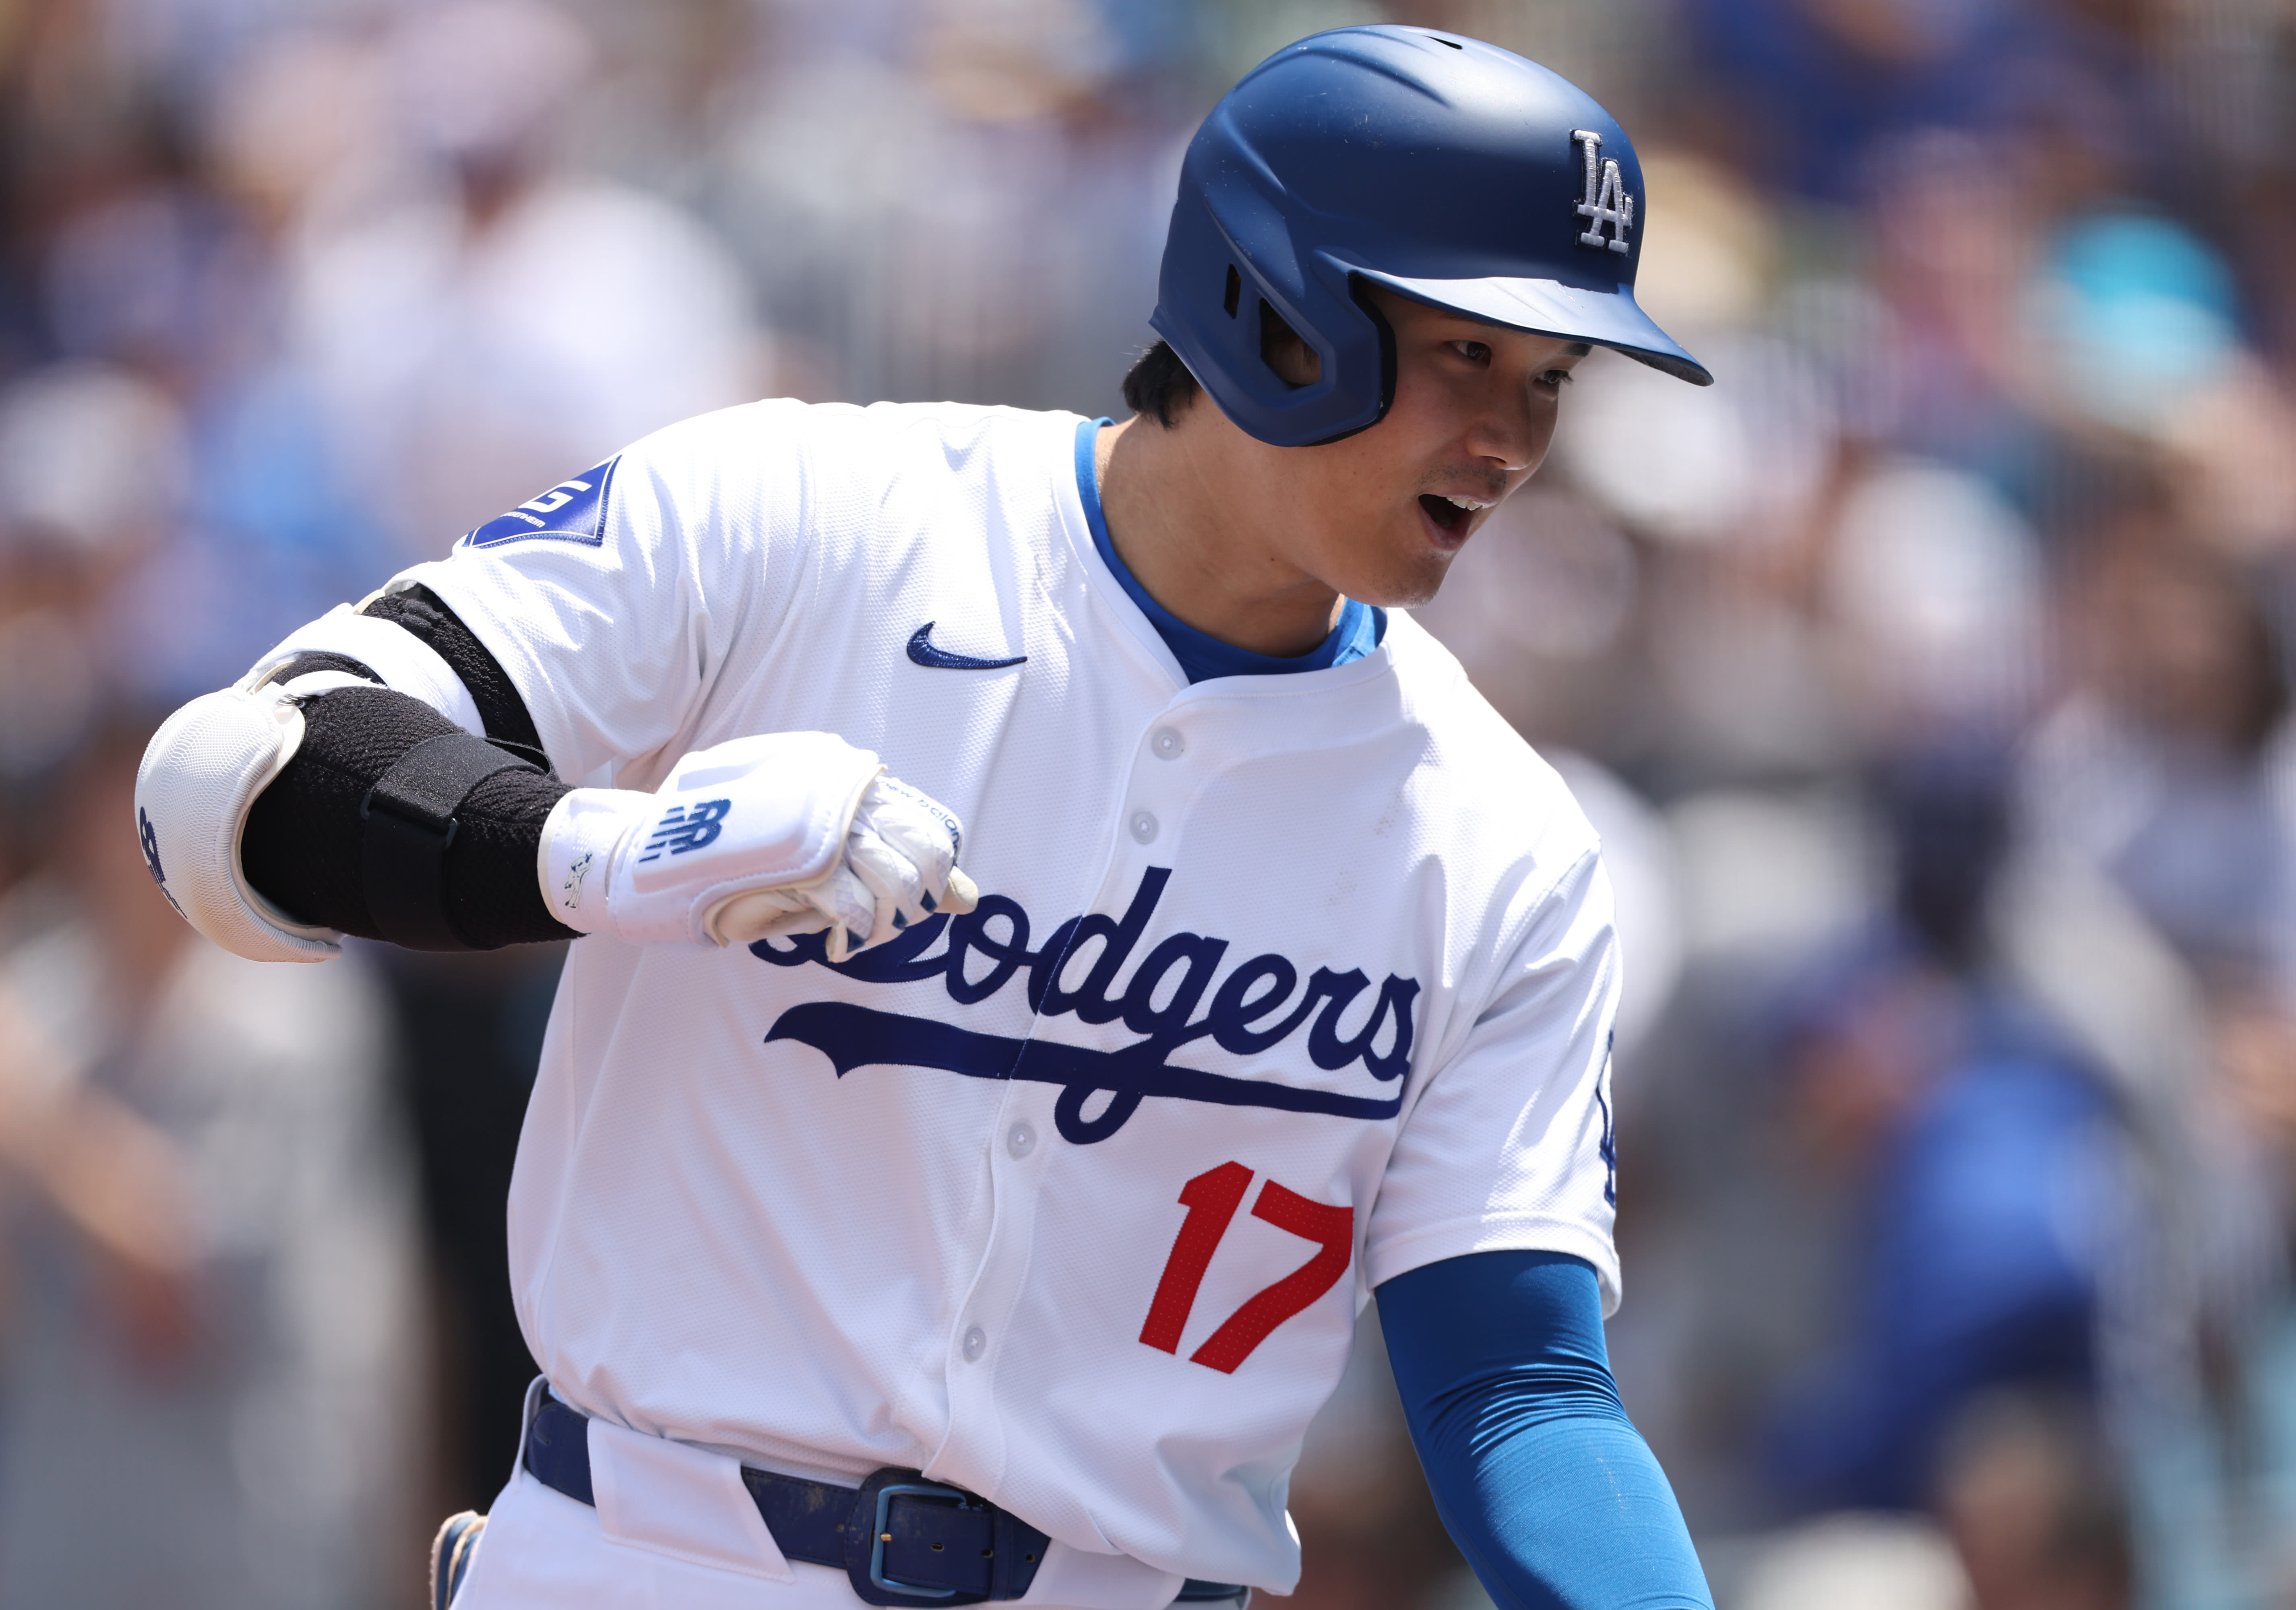 Shohei Ohtani punctuates Dodgers sweep of Braves with 2 home runs in series finale